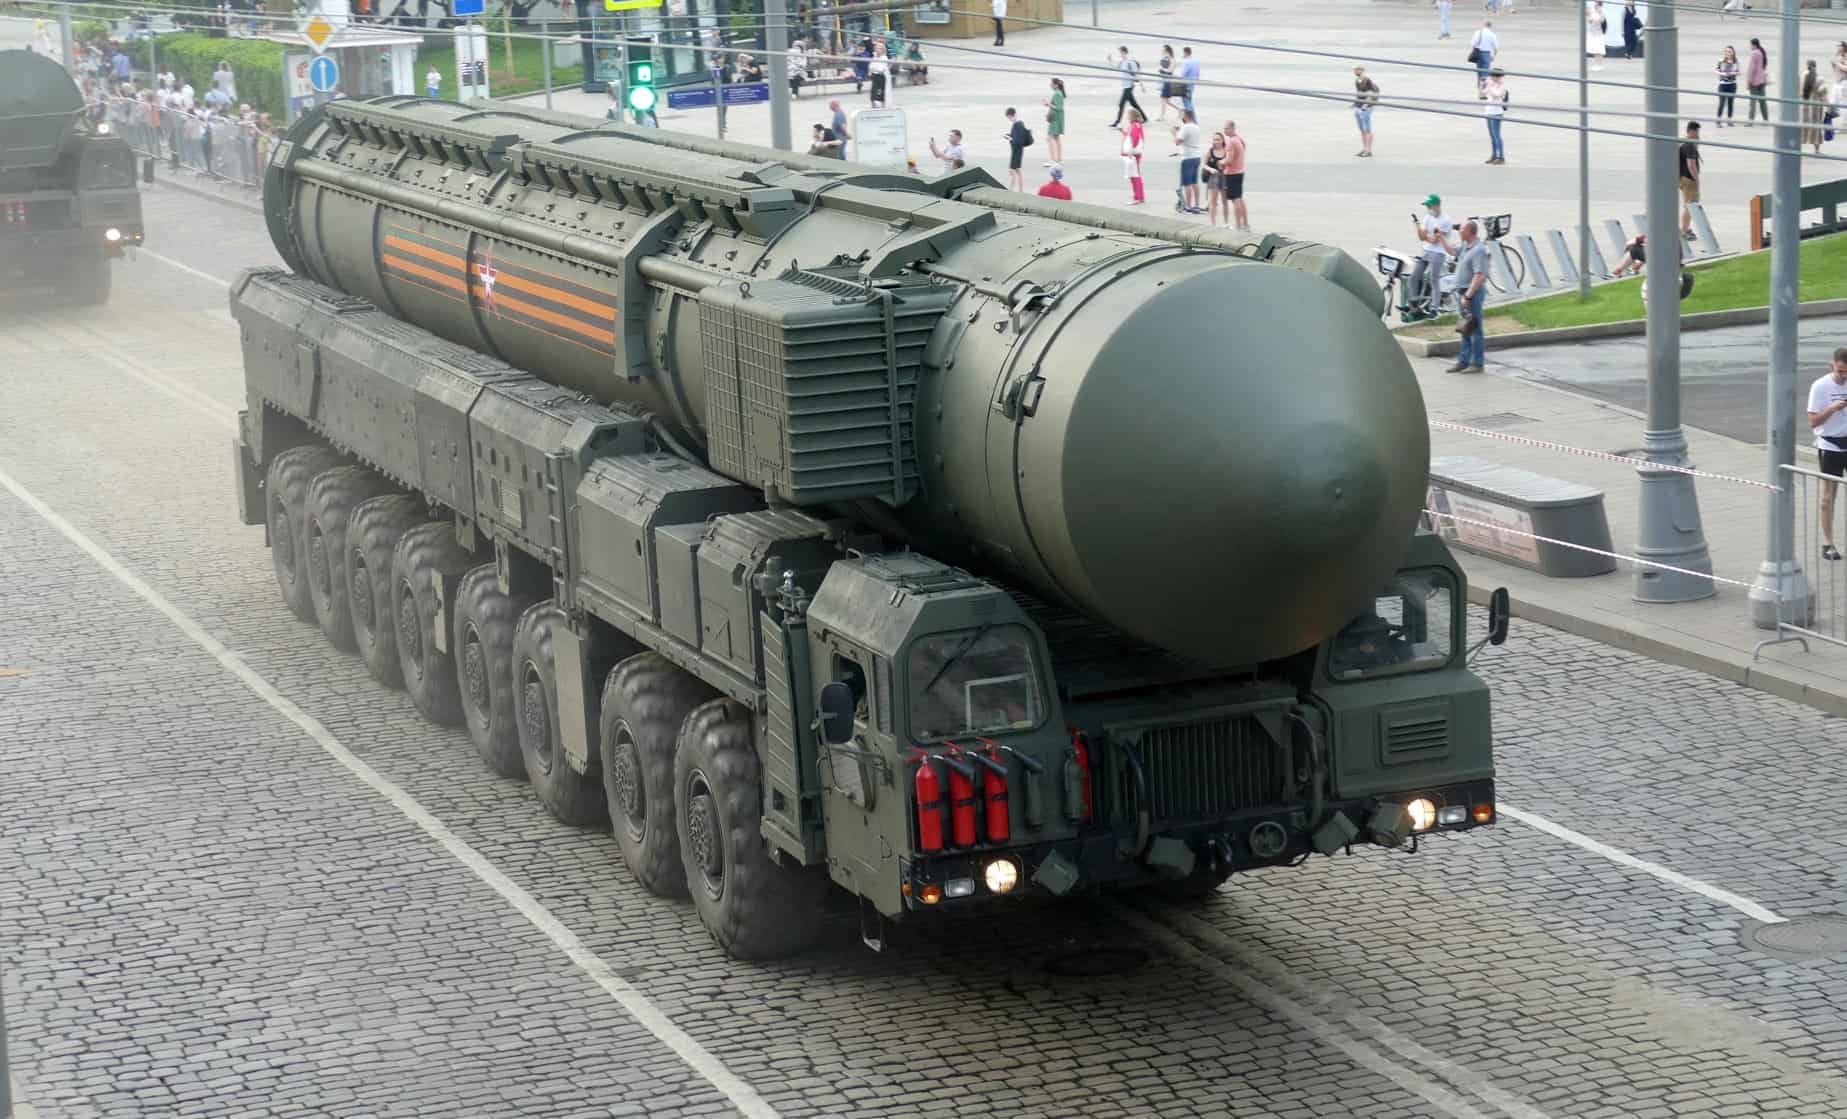 Defence Intelligence: Failed tests of the "Yars" and "Bulava" missiles, which are carriers of nuclear weapons, took place in Russia